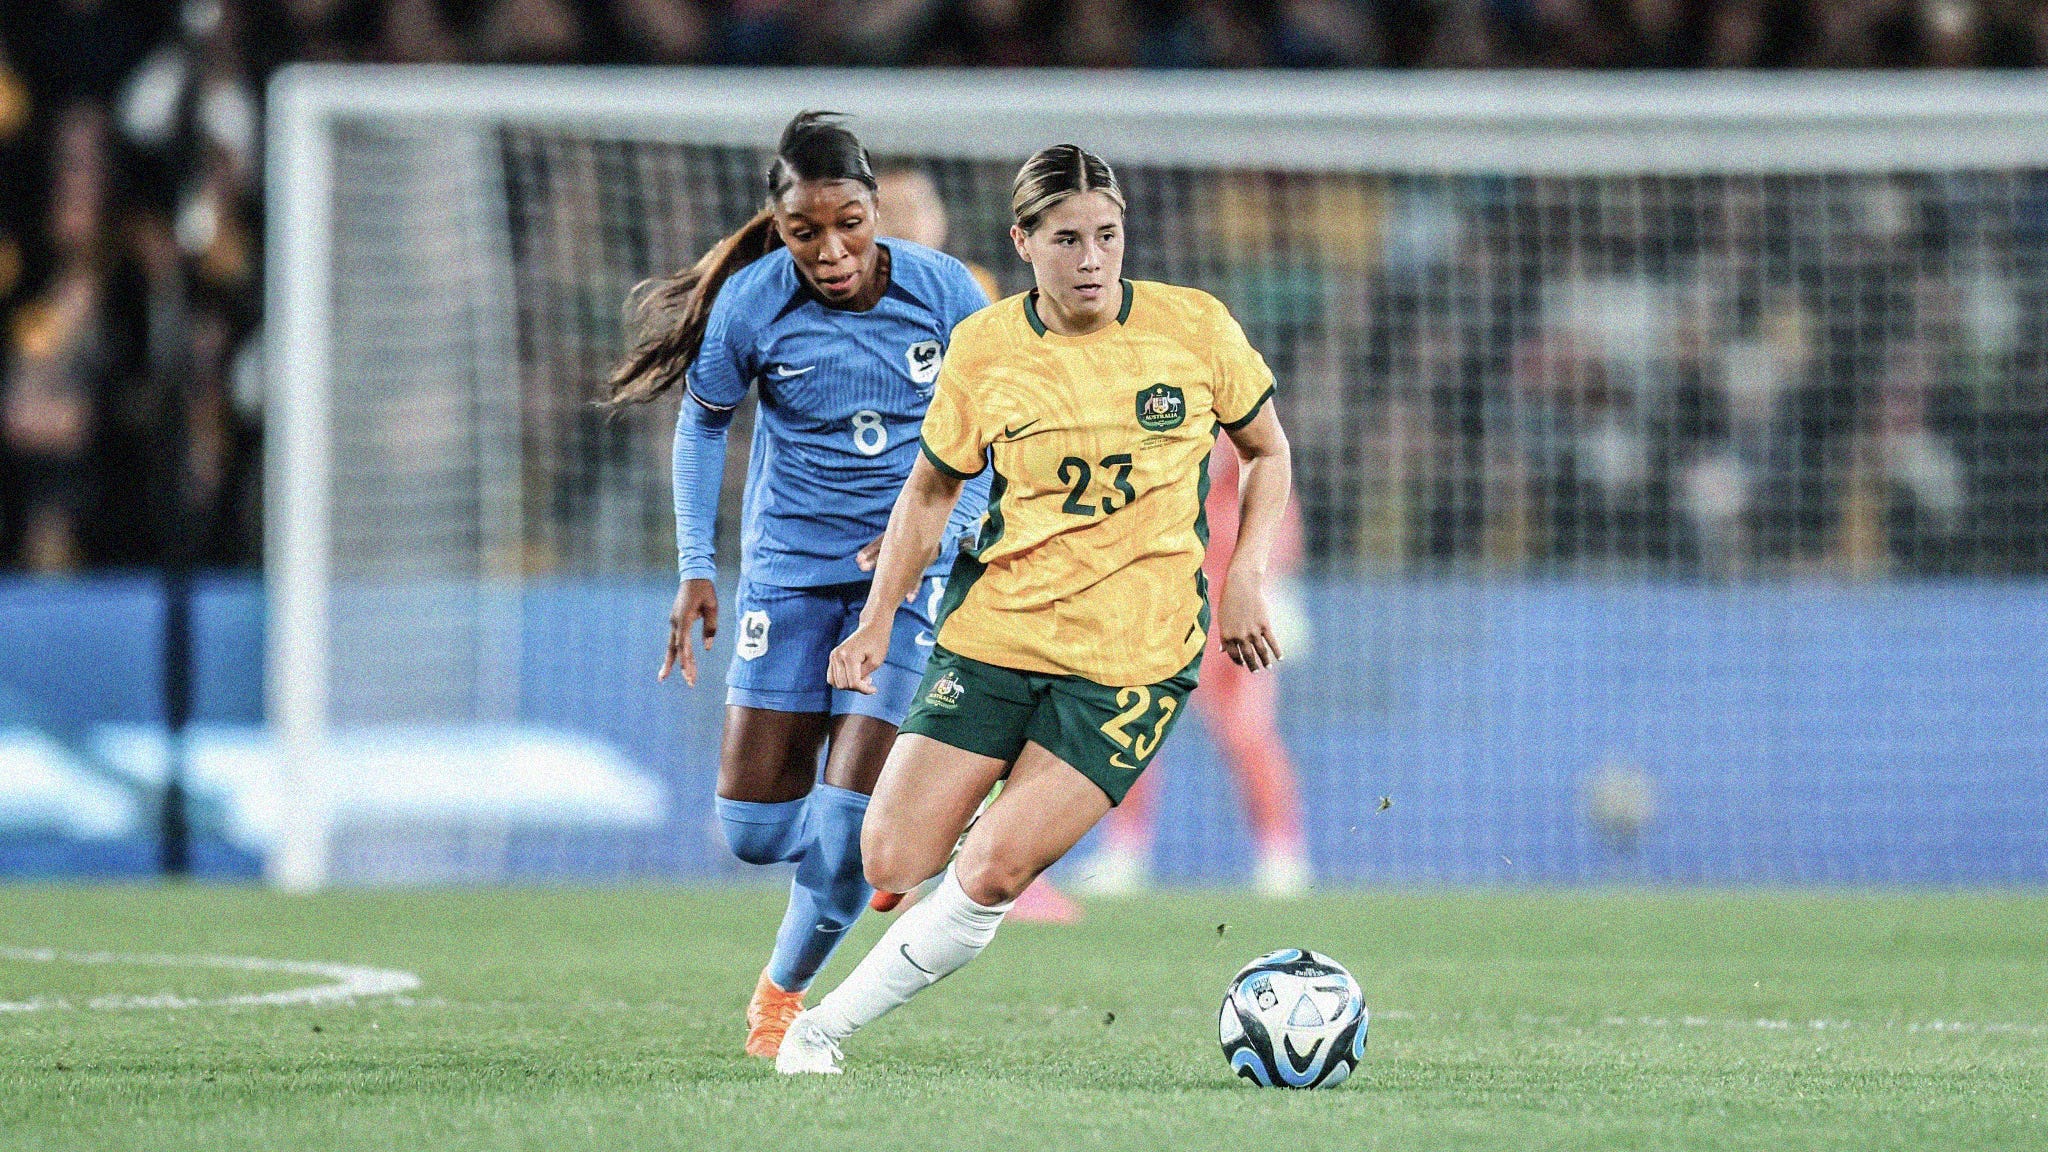 A photo of Australia's Kyra Cooney-Cross dribbling away from a French defender